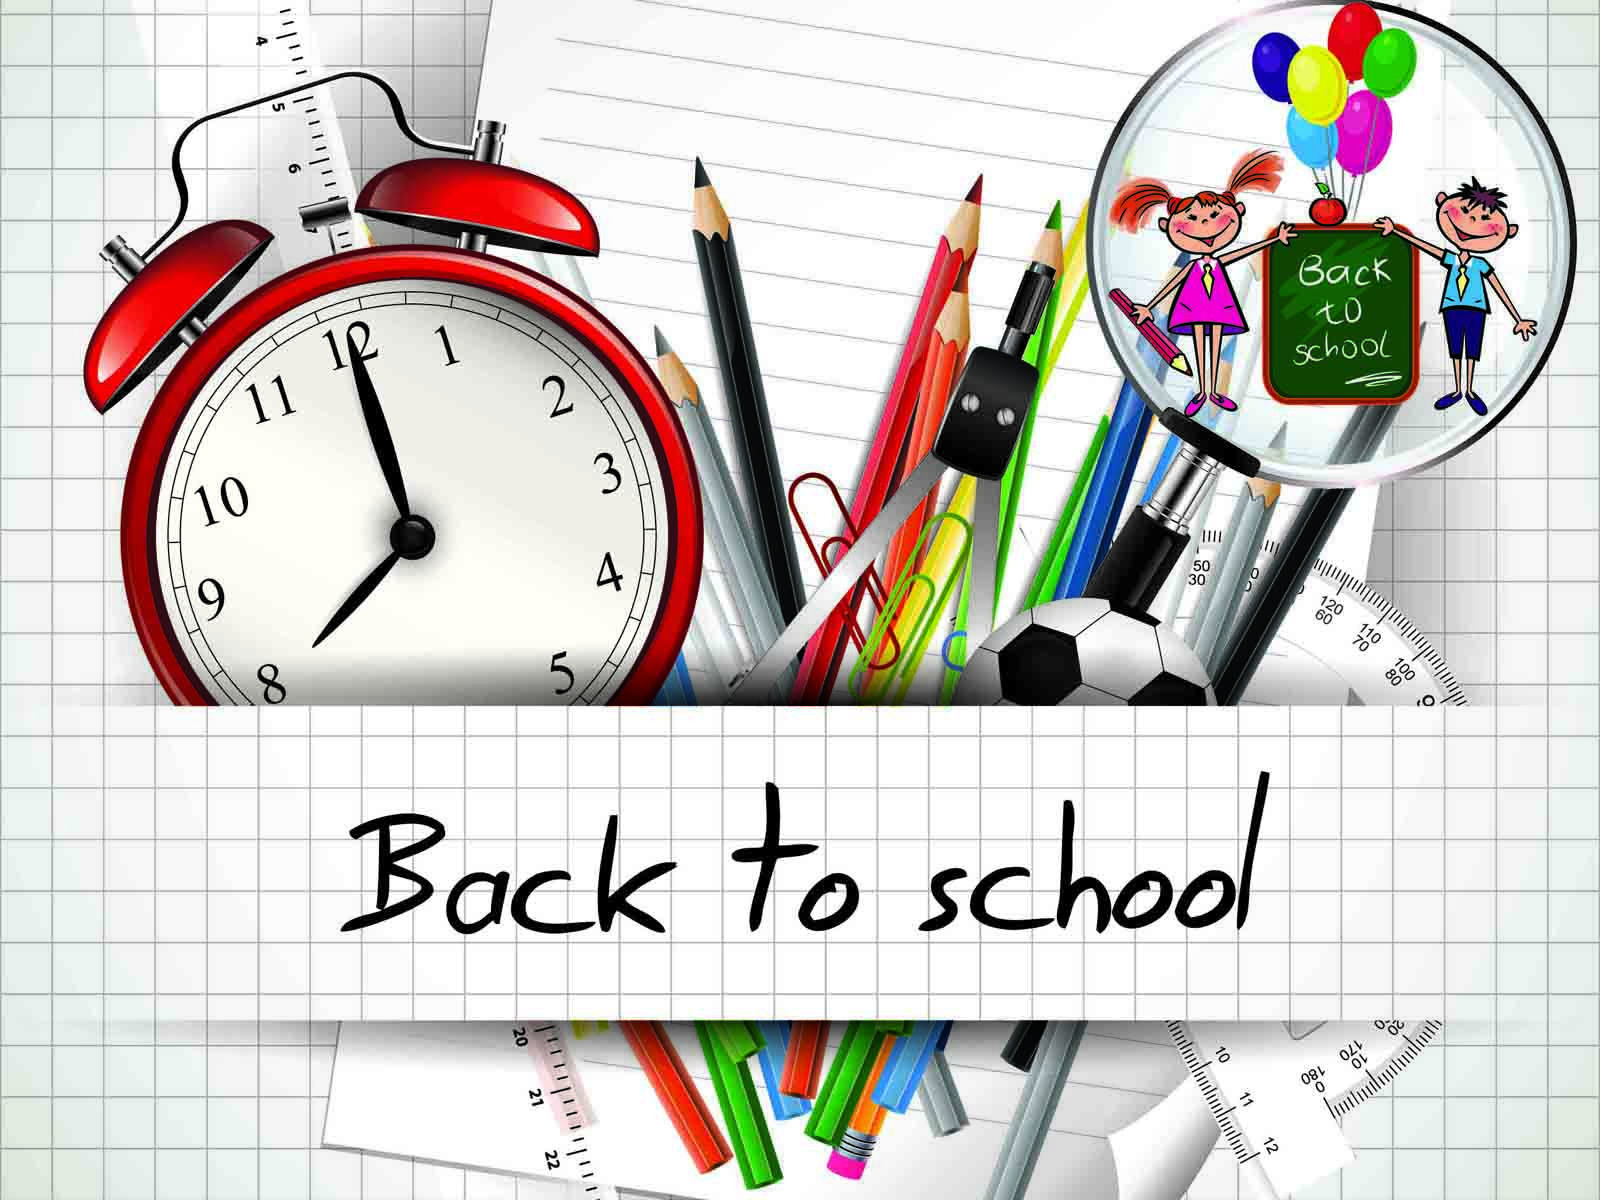 Wallpaper.wiki Photo Of Back To School 1 PIC WPC001550